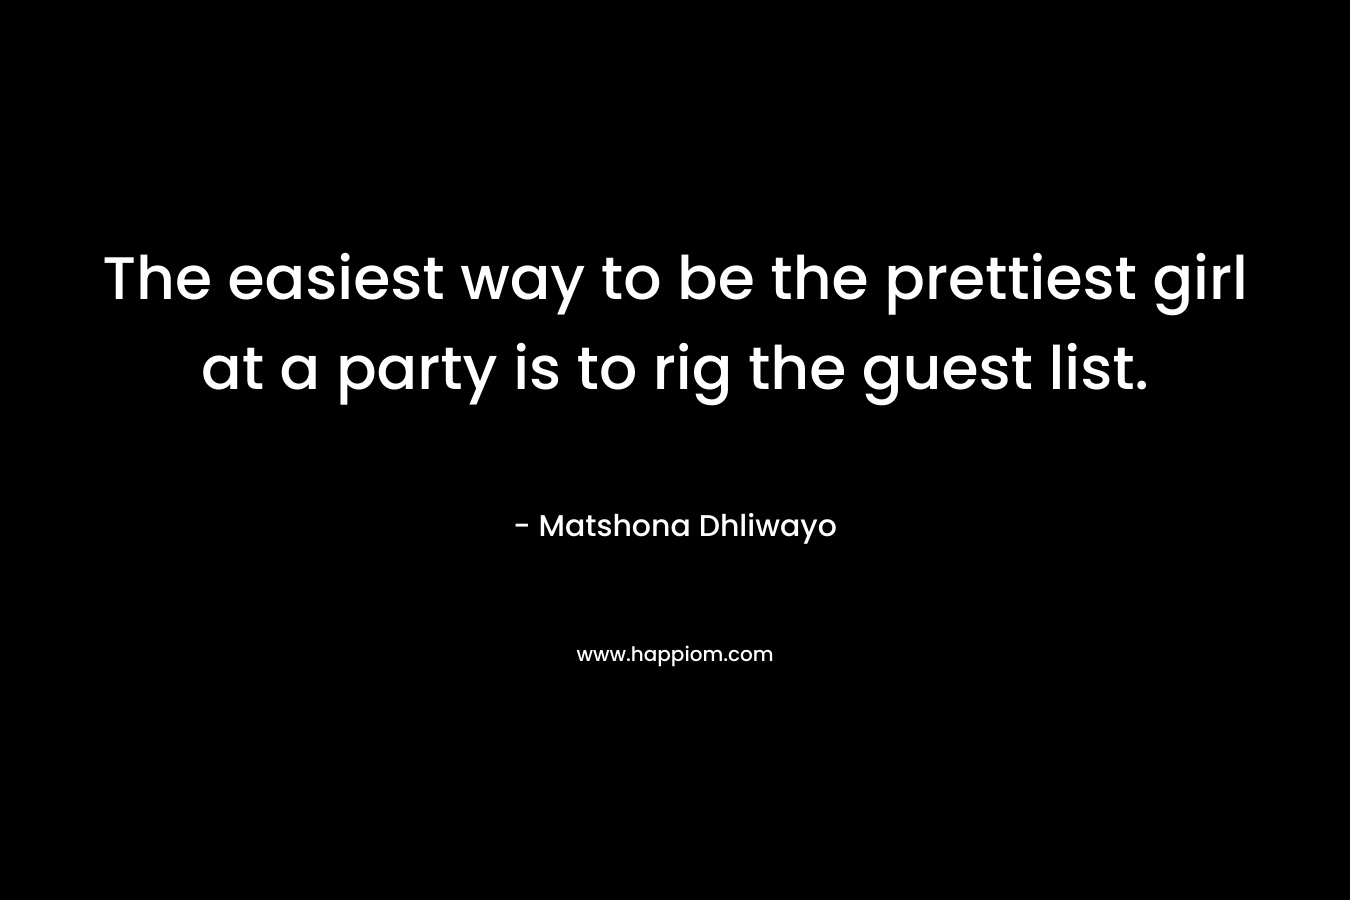 The easiest way to be the prettiest girl at a party is to rig the guest list. – Matshona Dhliwayo